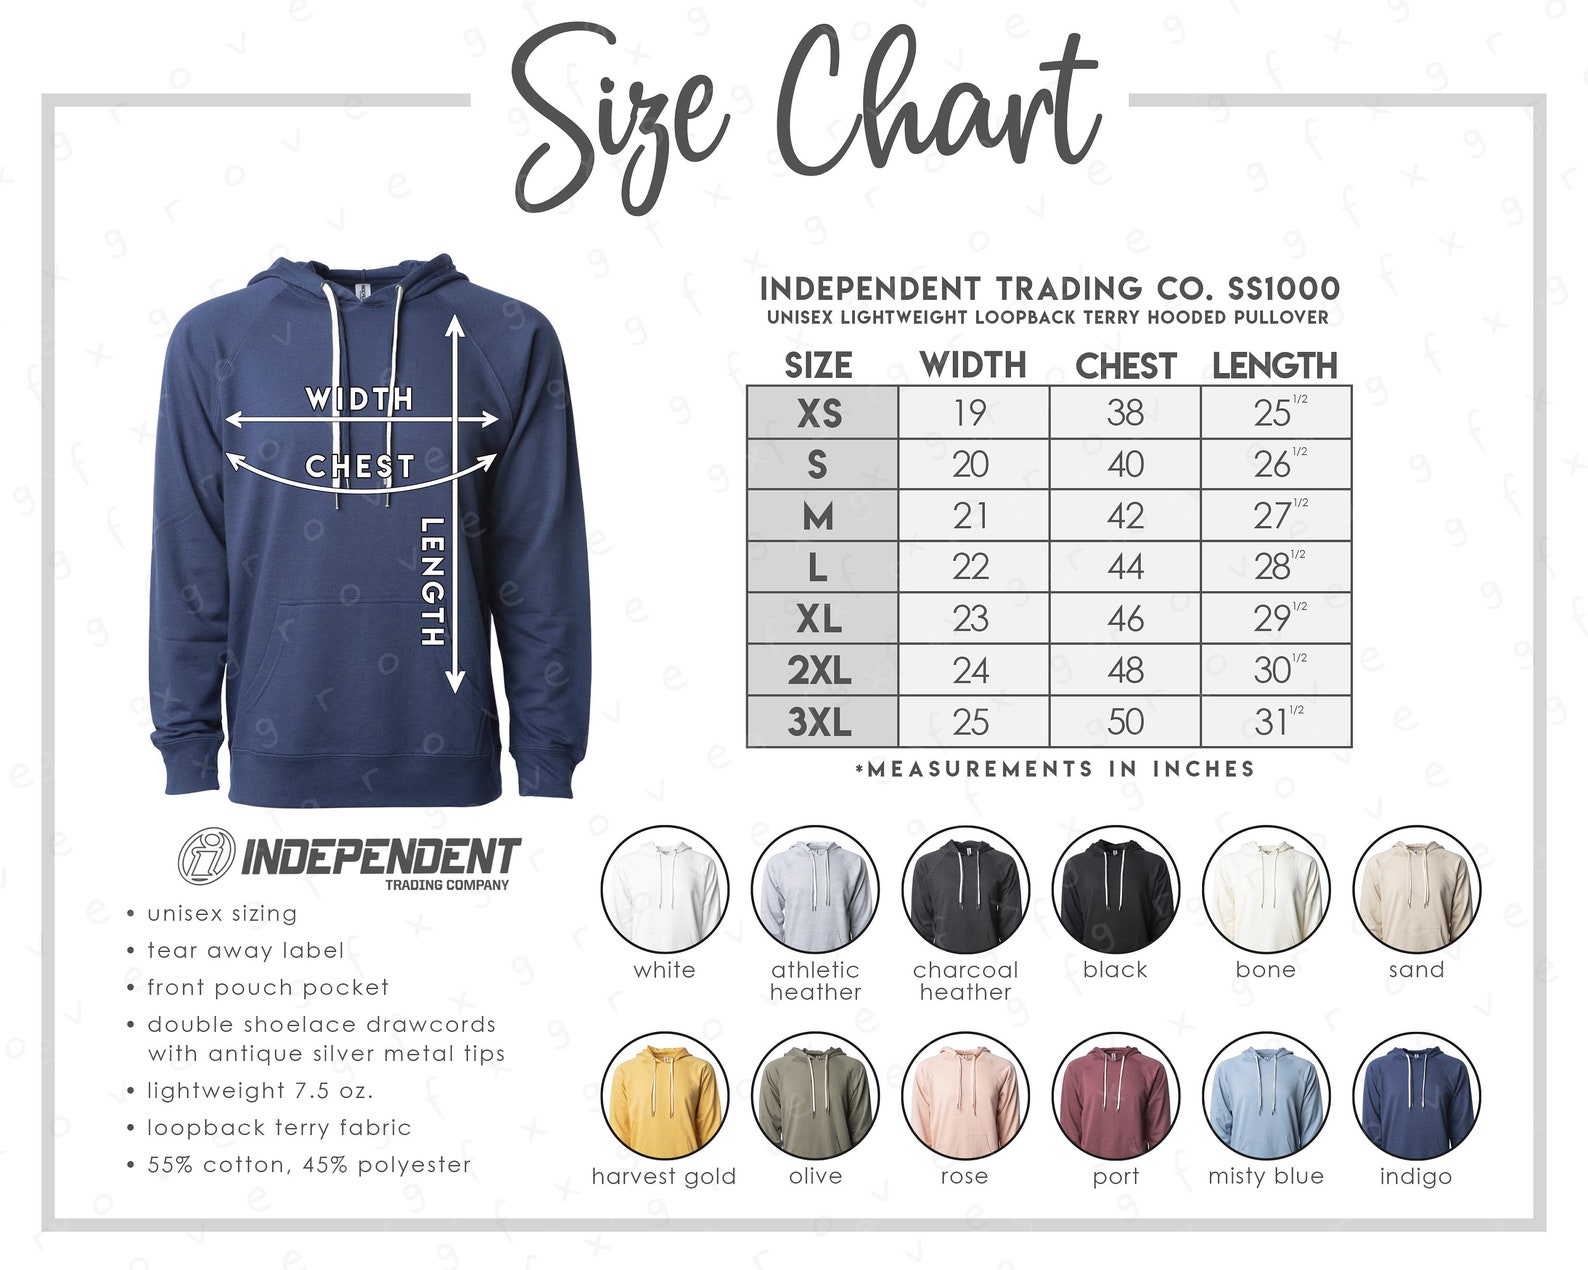 Independent Trading Co. SS1000 Size Color Chart 12 COLORS | Etsy